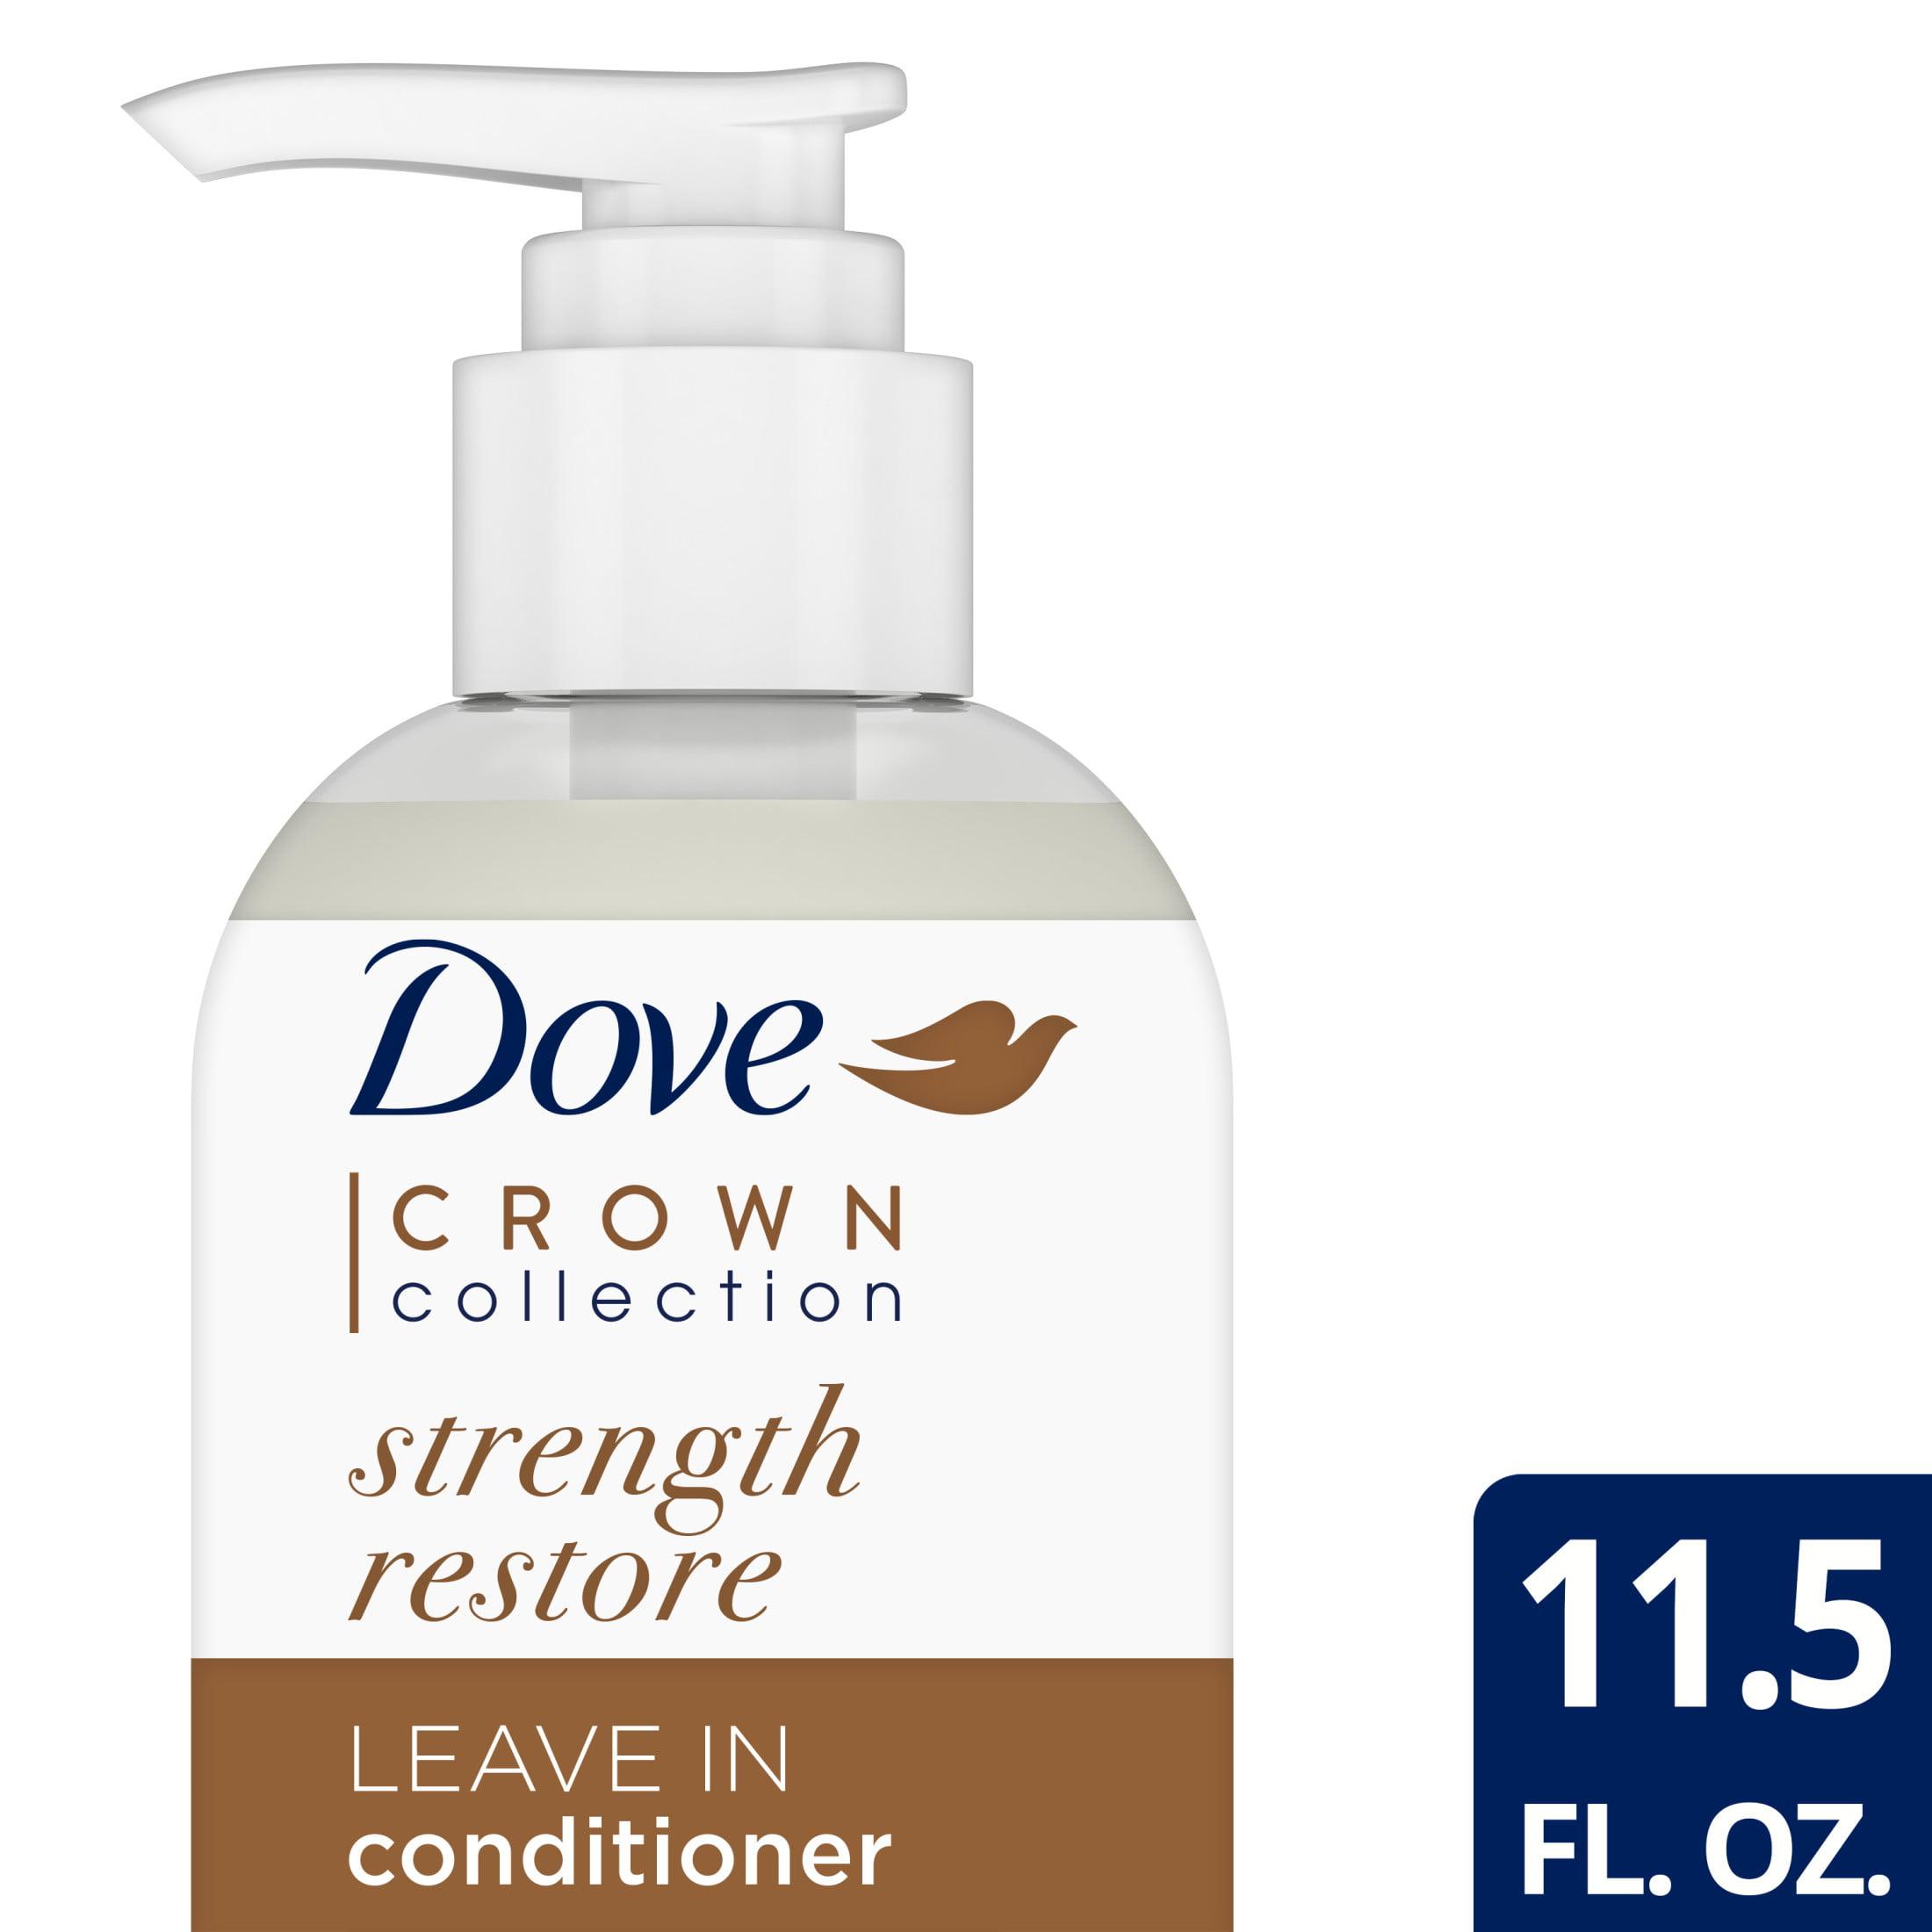 Dove Crown Collection Strength Restore Leave In Conditioner with Jojoba Oil, 11.5 fl oz - image 3 of 9